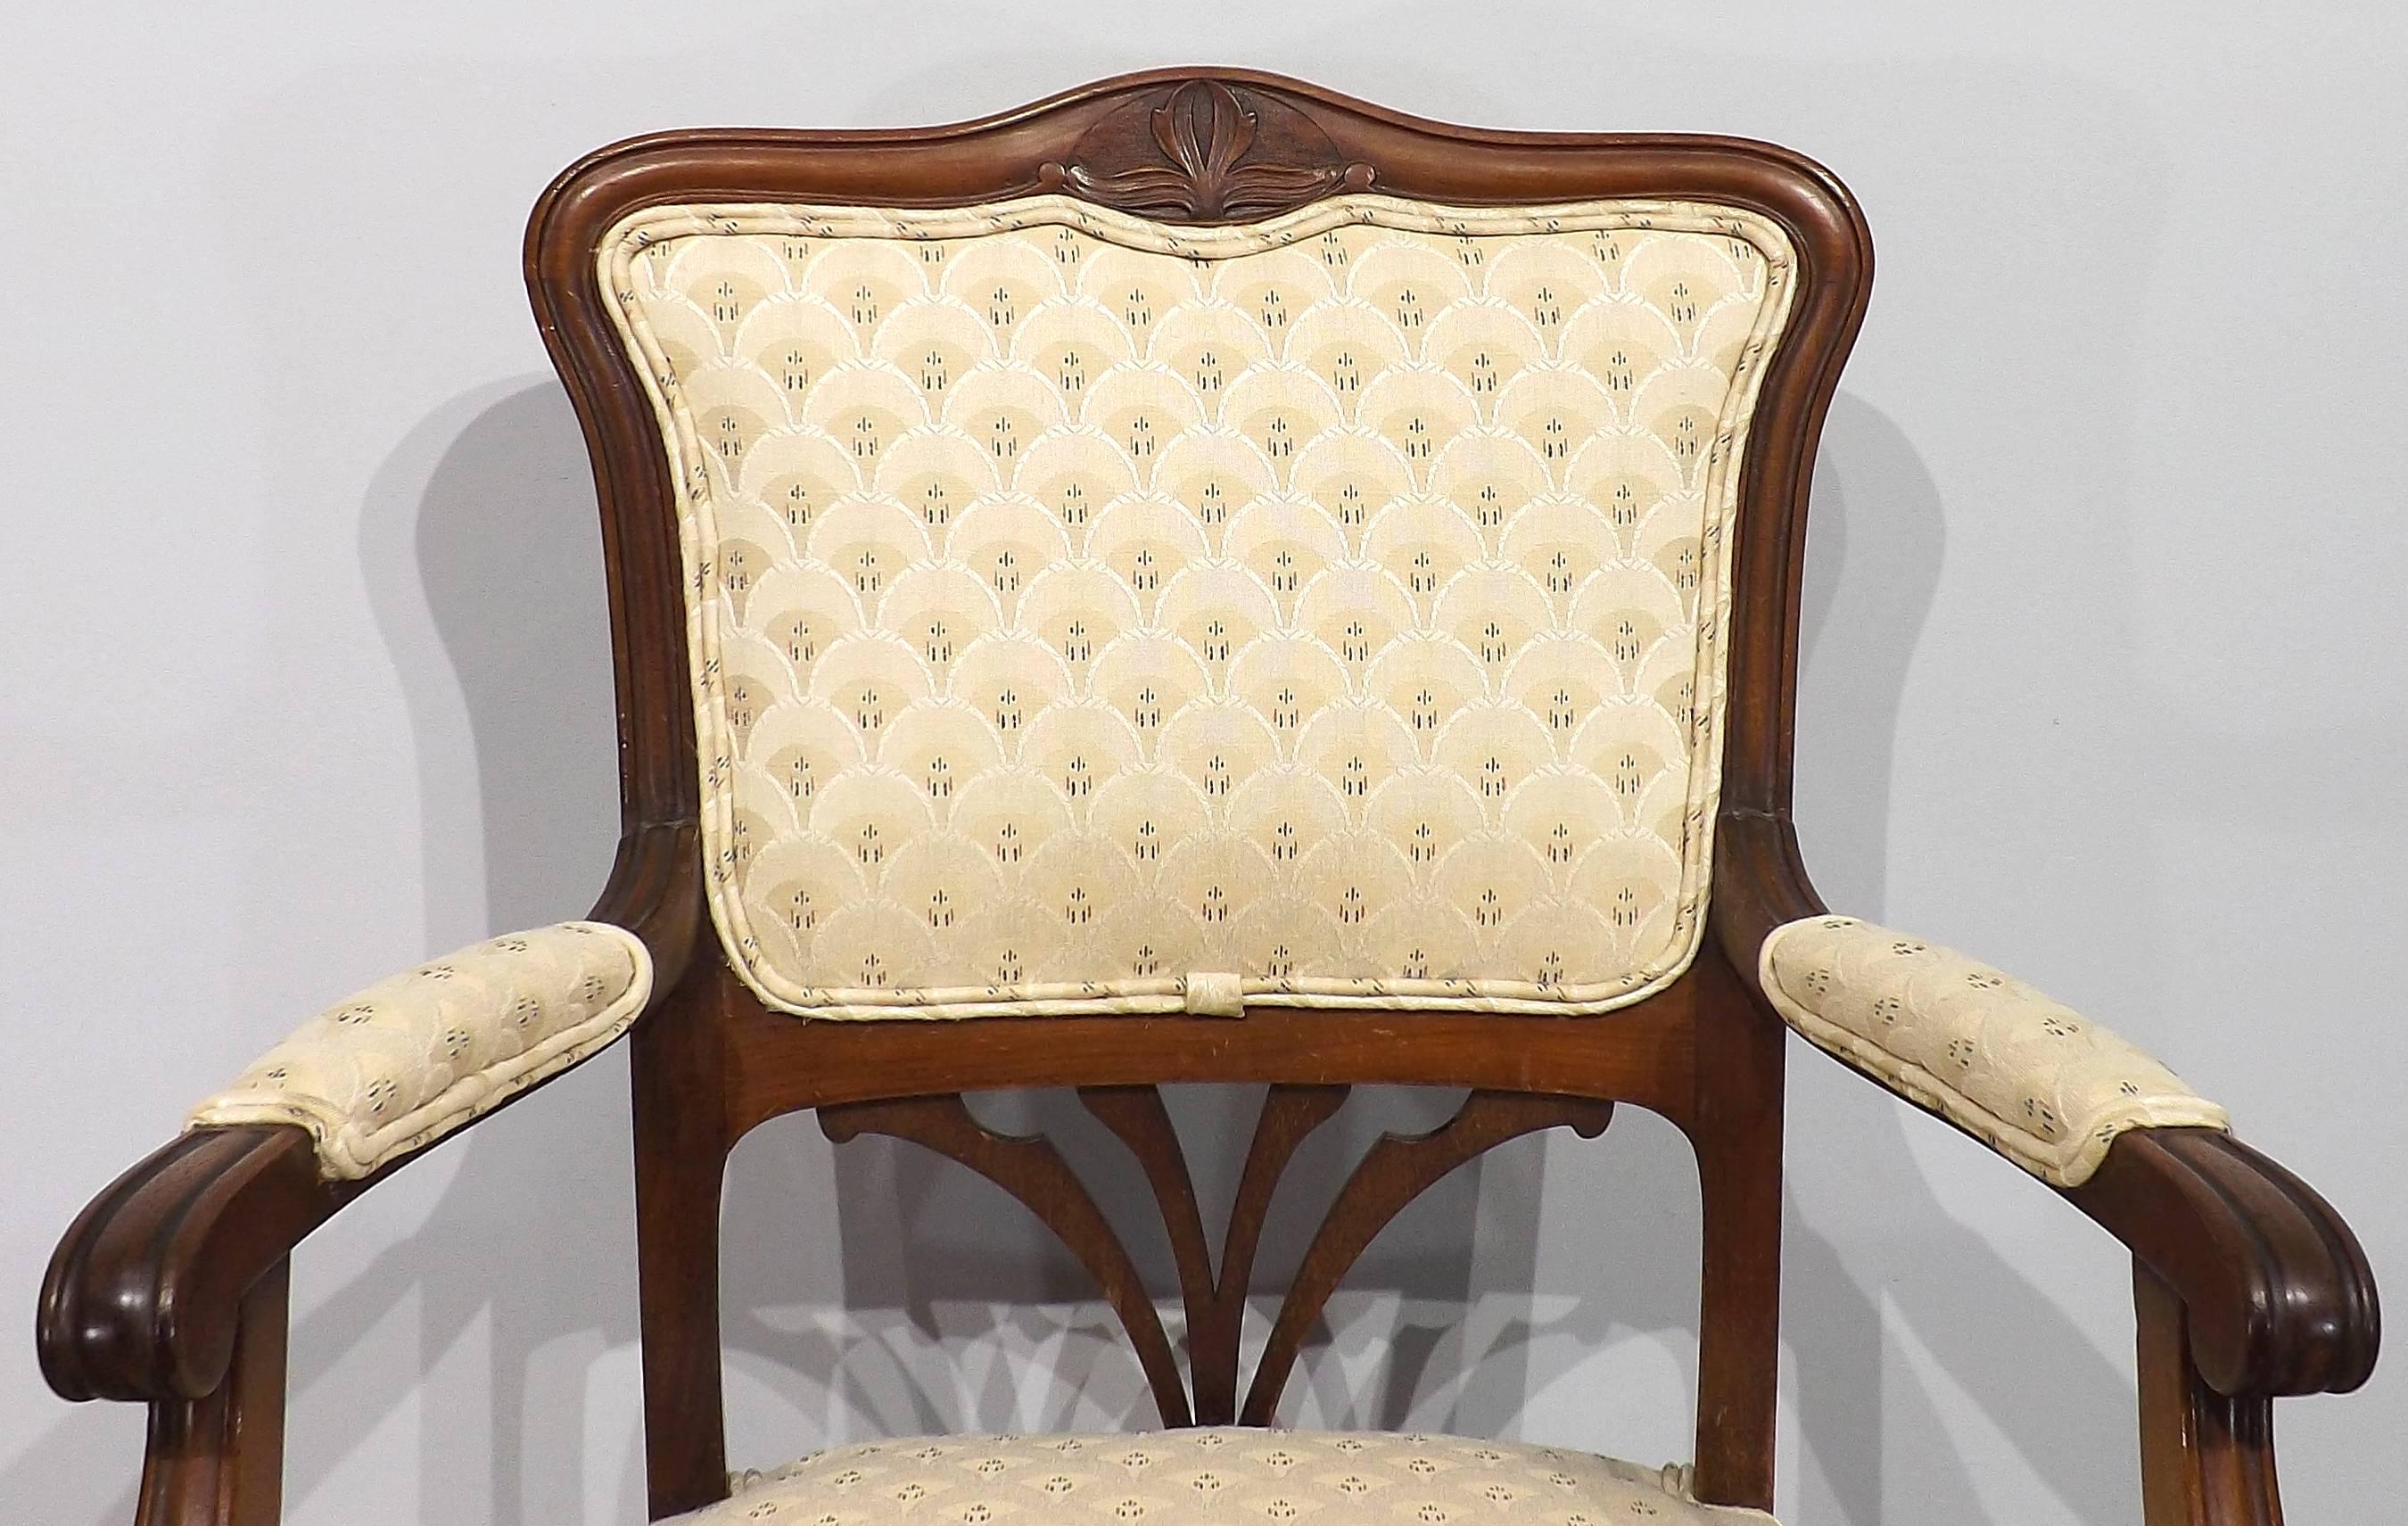 Art Nouveau Mahogany Chair In Excellent Condition For Sale In Charlevoix, MI